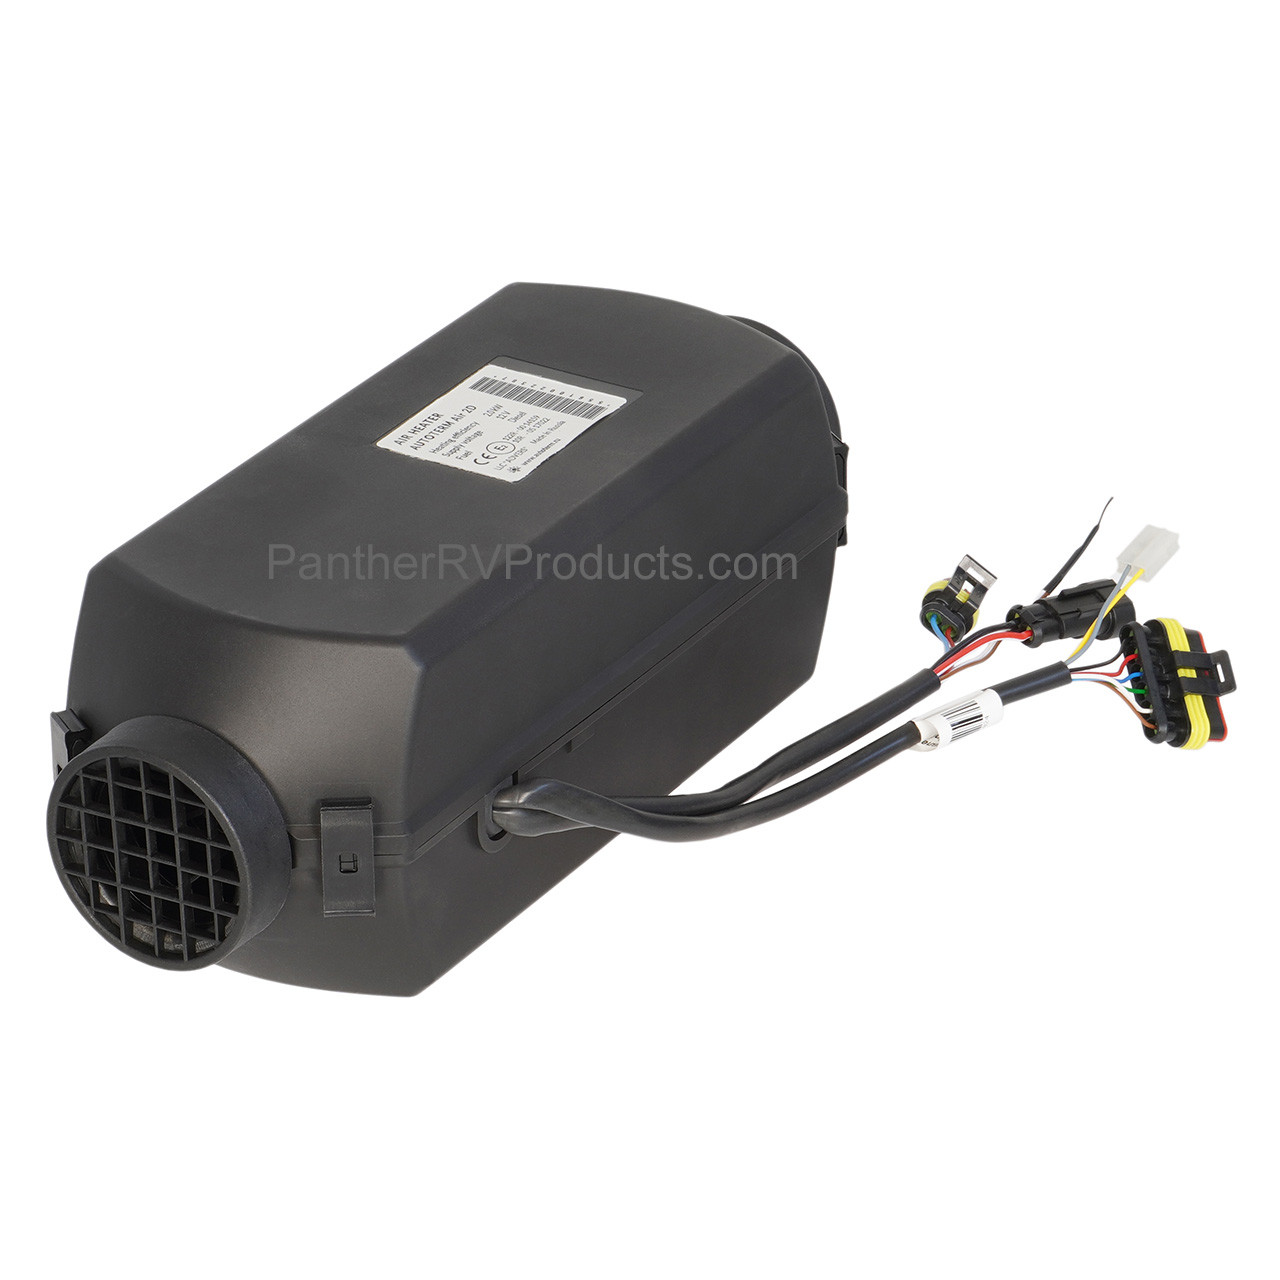 Air heater - Air 2D - Autoterm LLC - diesel / for boat / for yachts